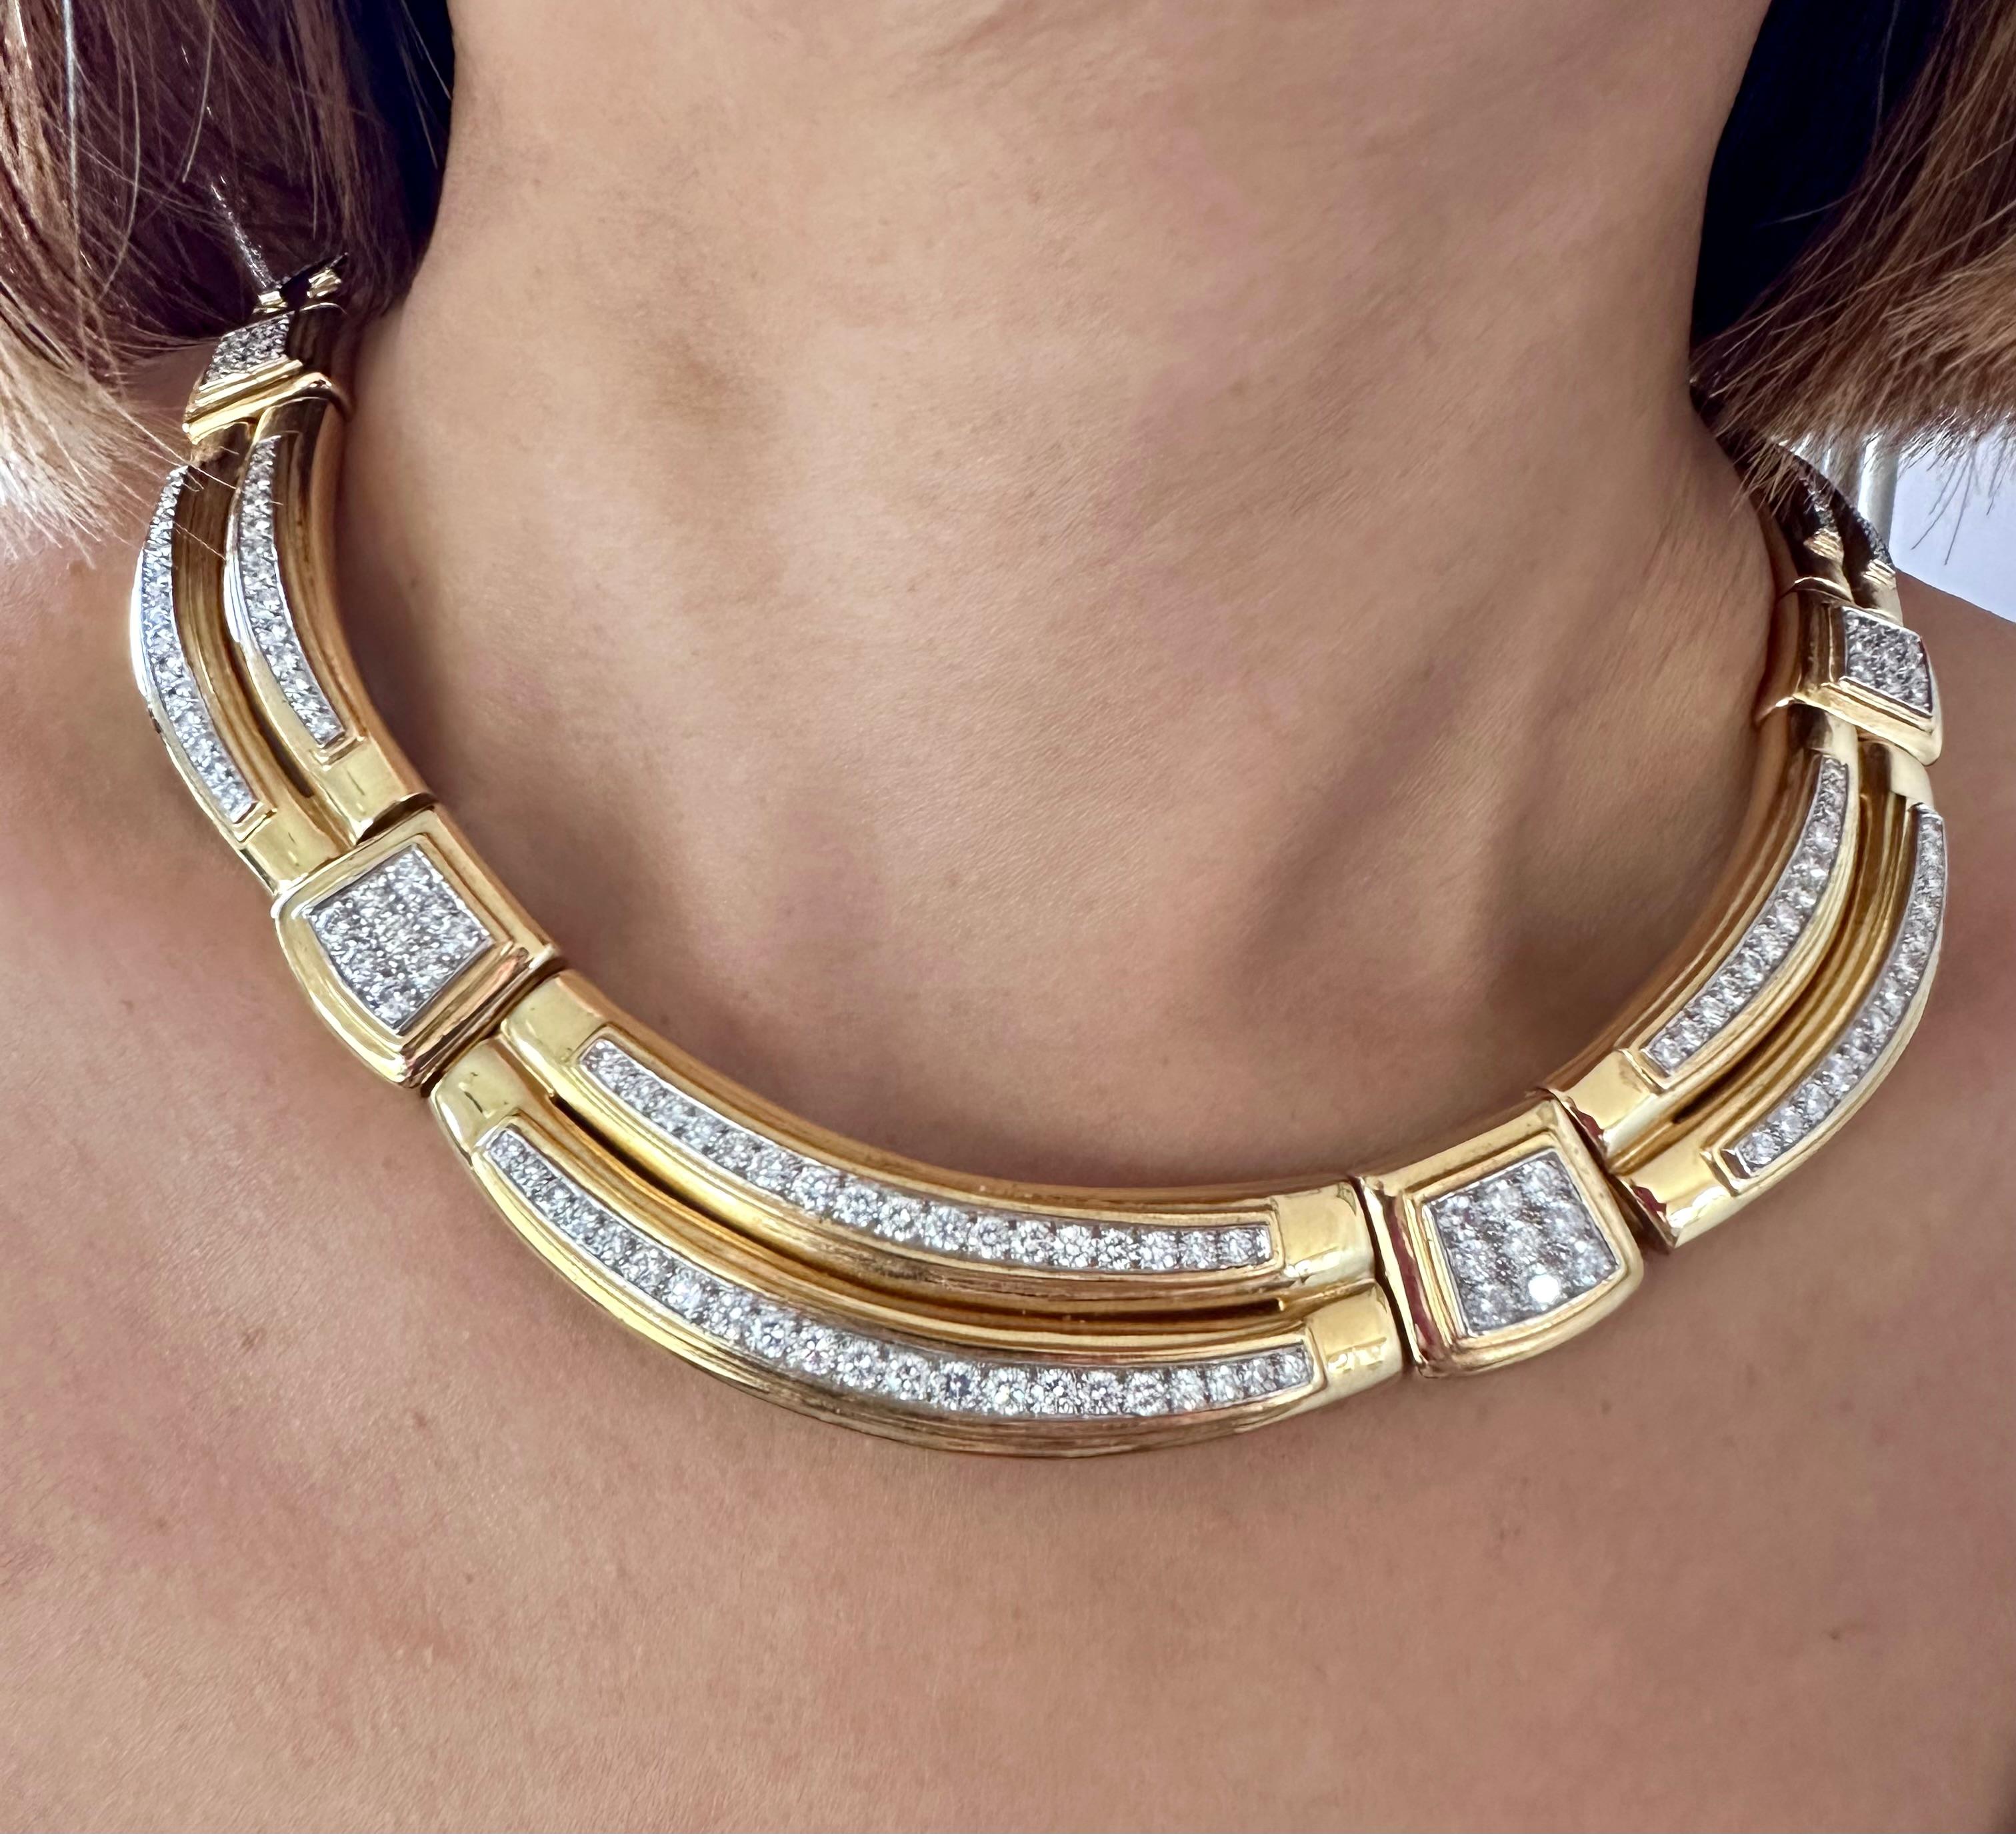 Vintage David Webb 1970s
18kt Yellow Gold Diamond Collar Necklace set with approximately 15 Cts of Fine White Round Brilliant Cut Diamonds 
Length: 16 inches and  5/8 in Width
Hallmarks: David Webb 18k Plat 55
155 G Total Weight 